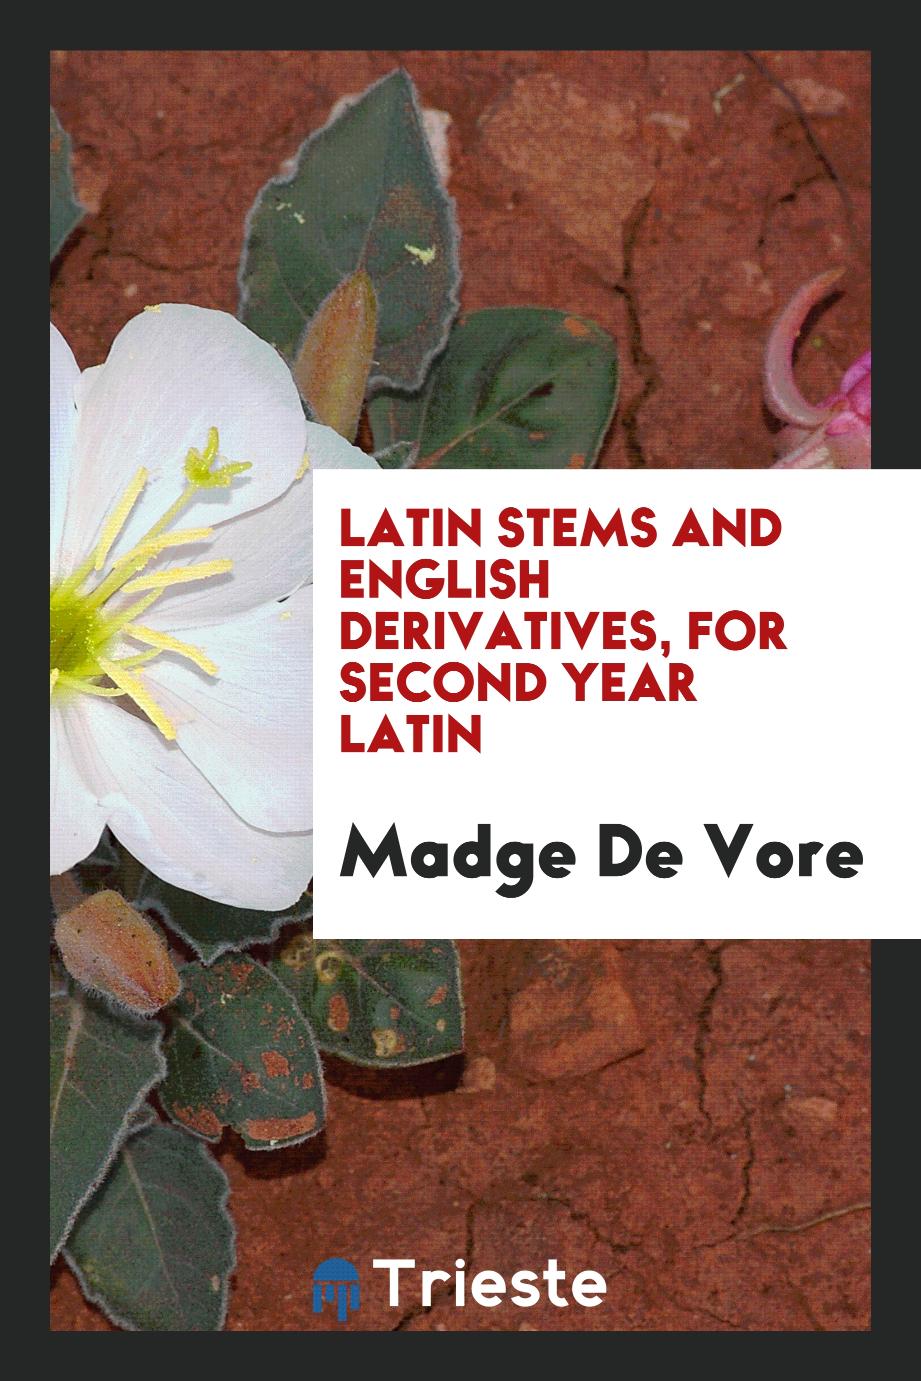 Latin Stems and English Derivatives, for Second Year Latin